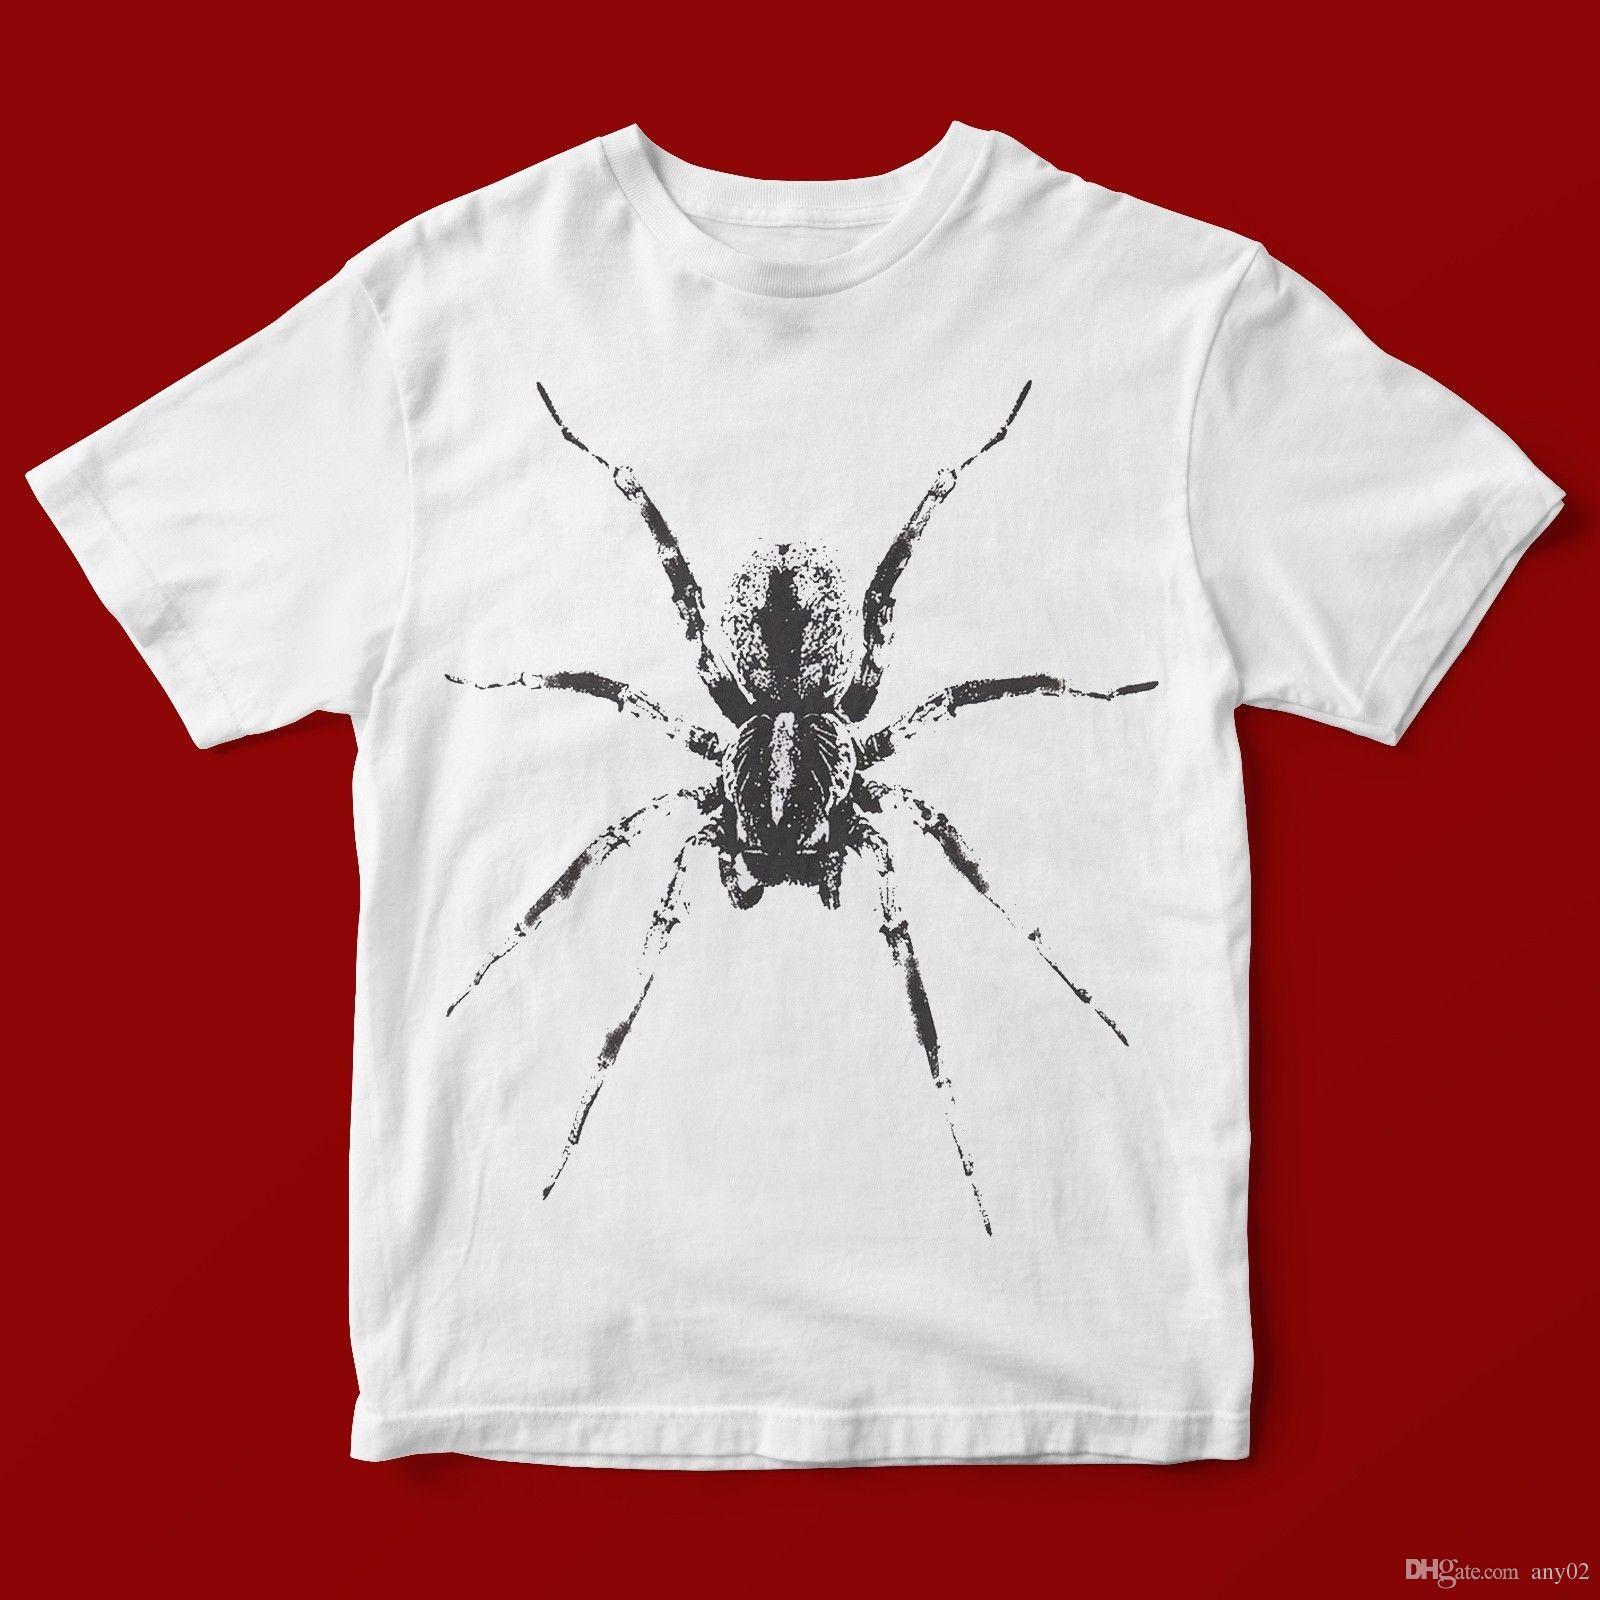 Cool Spider Logo - COOL SPIDER LOGO T SHIRT UNISEX 600 Tshirt Tshirts From Any02